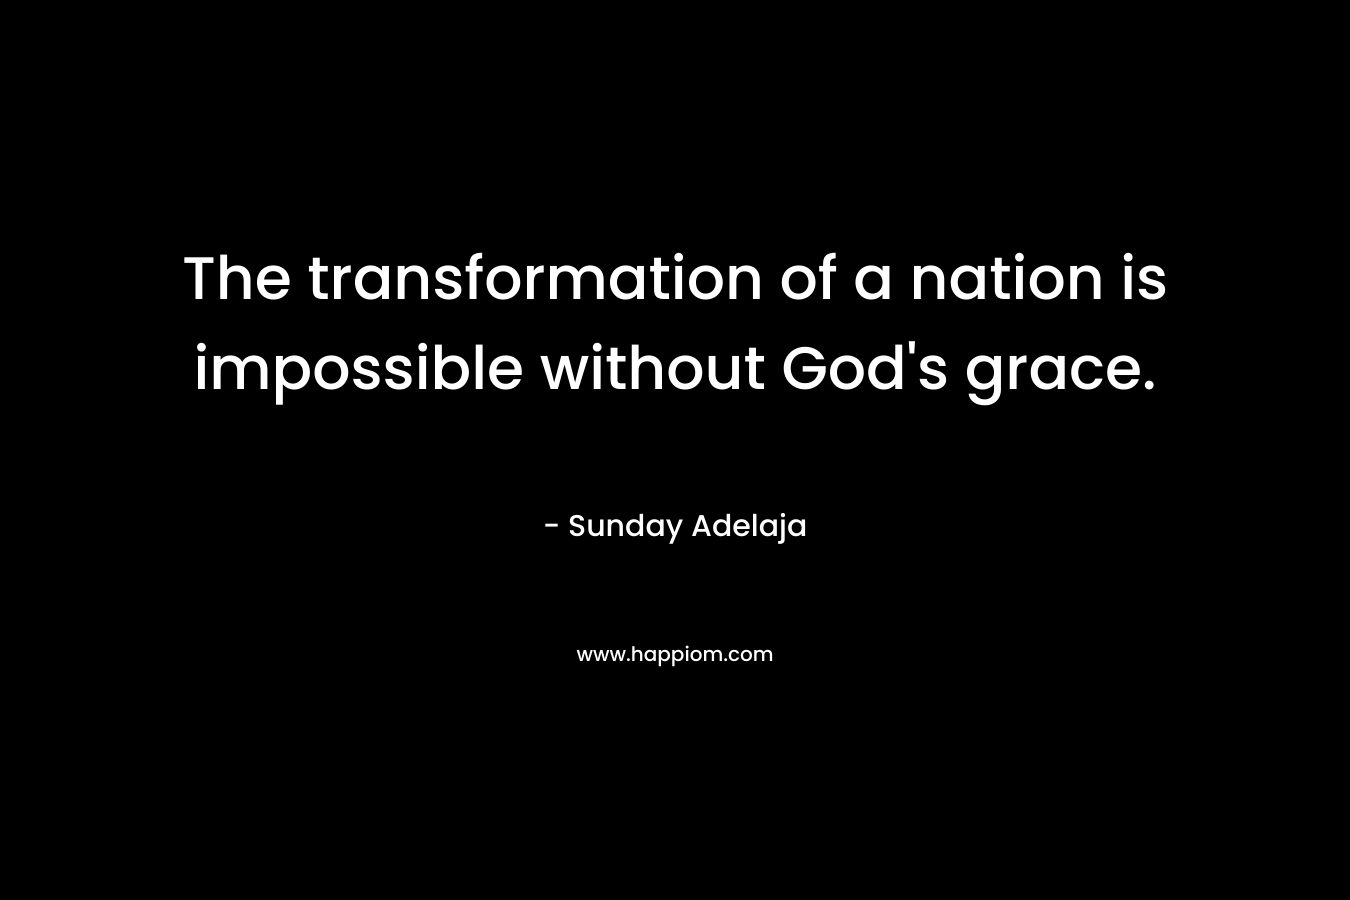 The transformation of a nation is impossible without God's grace.